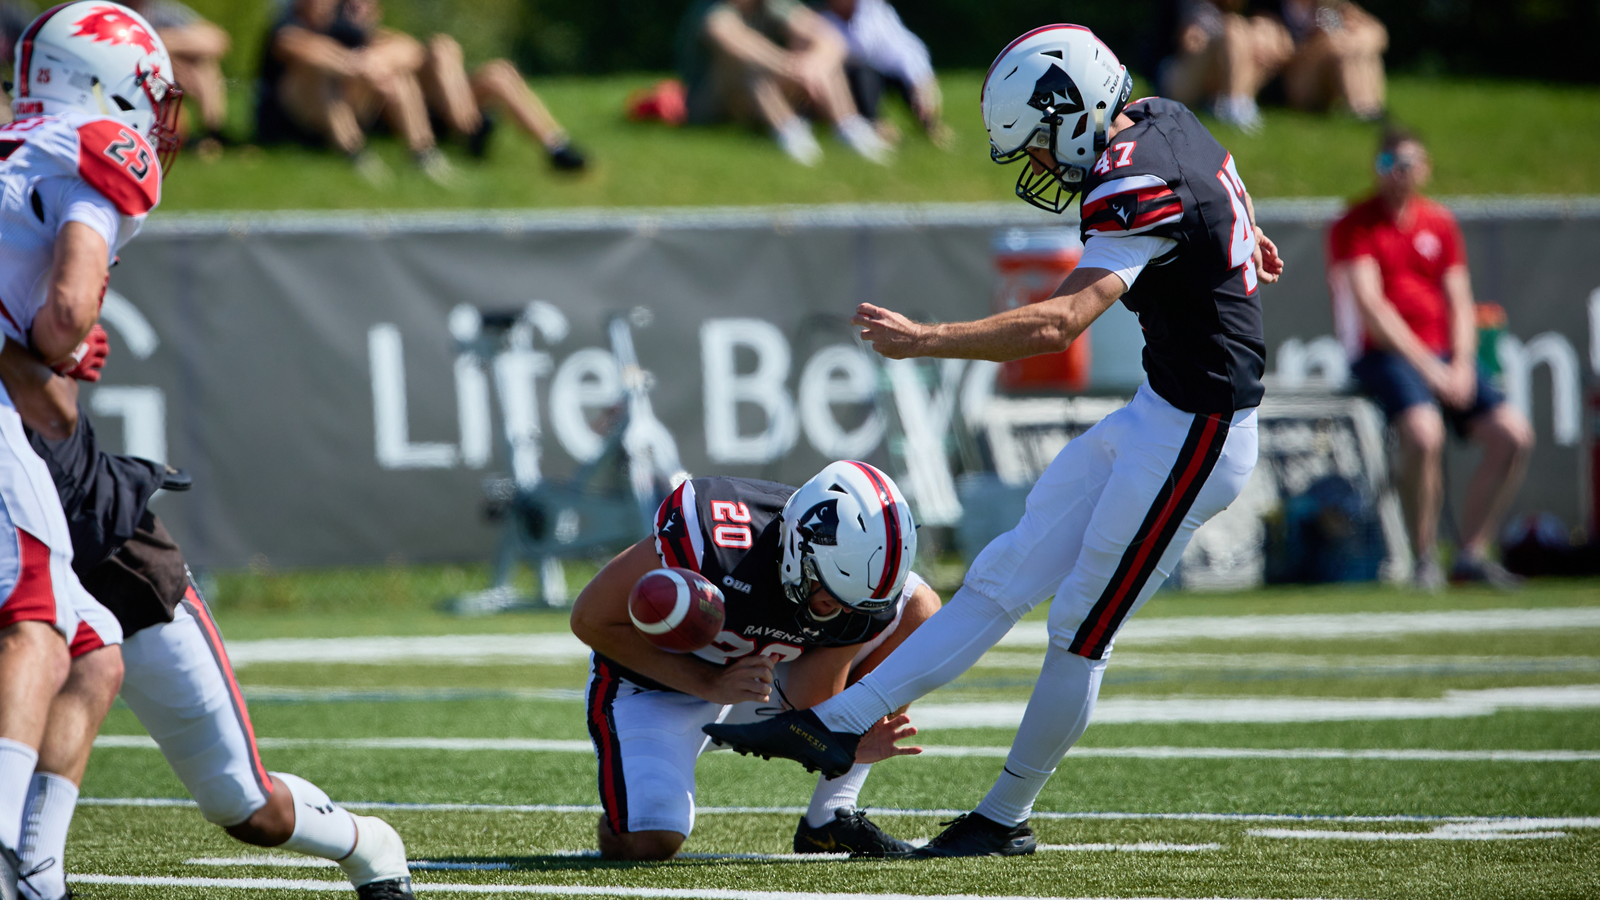 Action photo of Carleton football player having just kicked the ball for a field goal attempt, as the ball takes off through the air and the kicker follows through on the kick